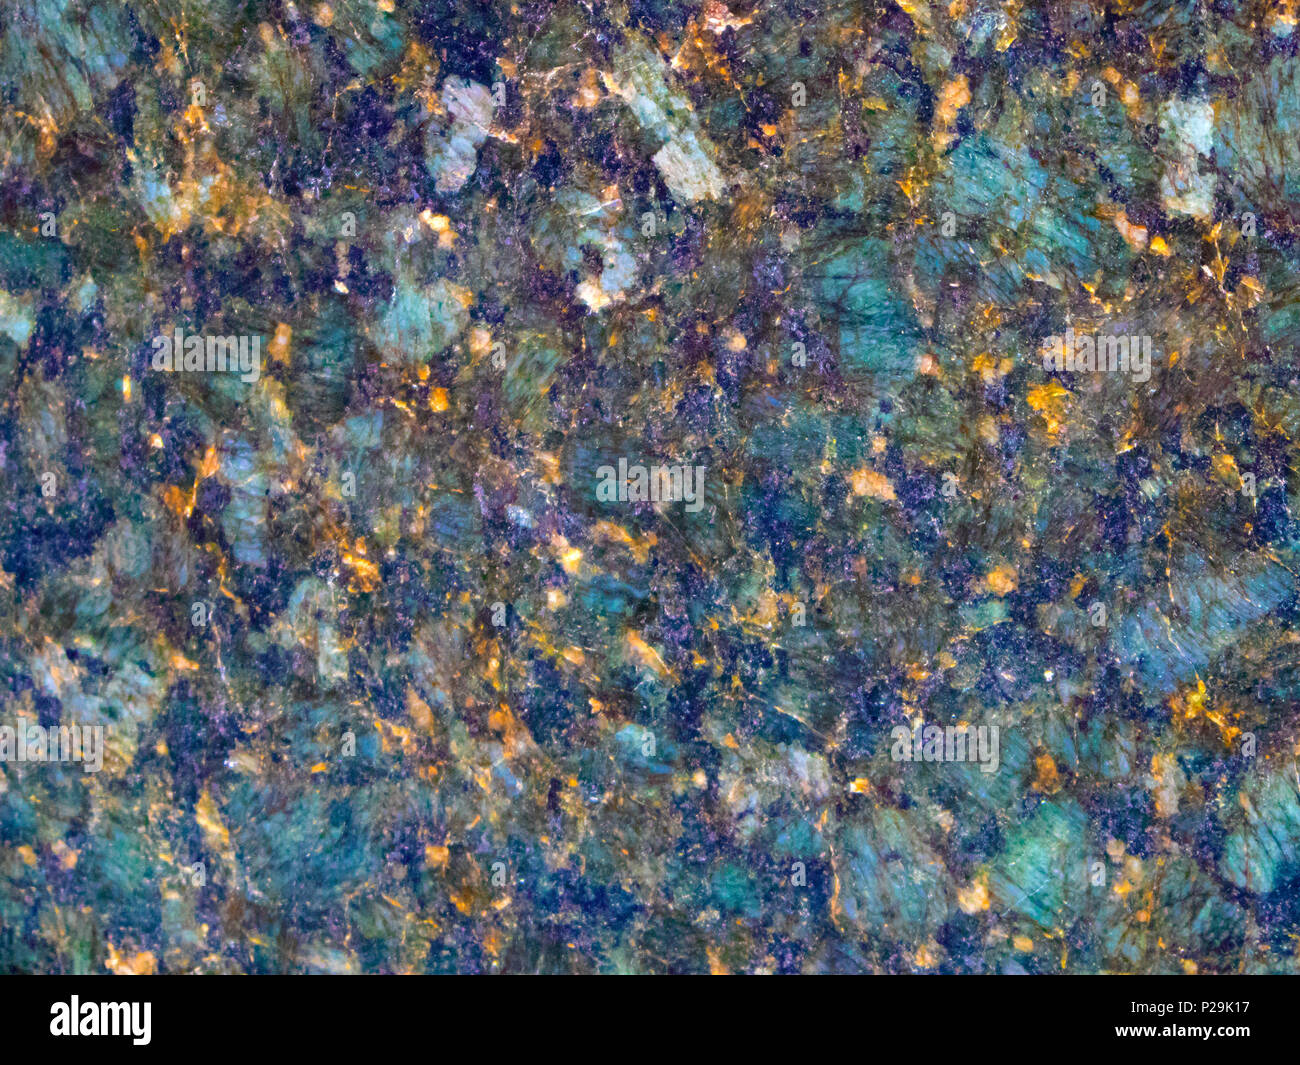 Colorful natural stone texture, smooth granite surface, may be used as background Stock Photo